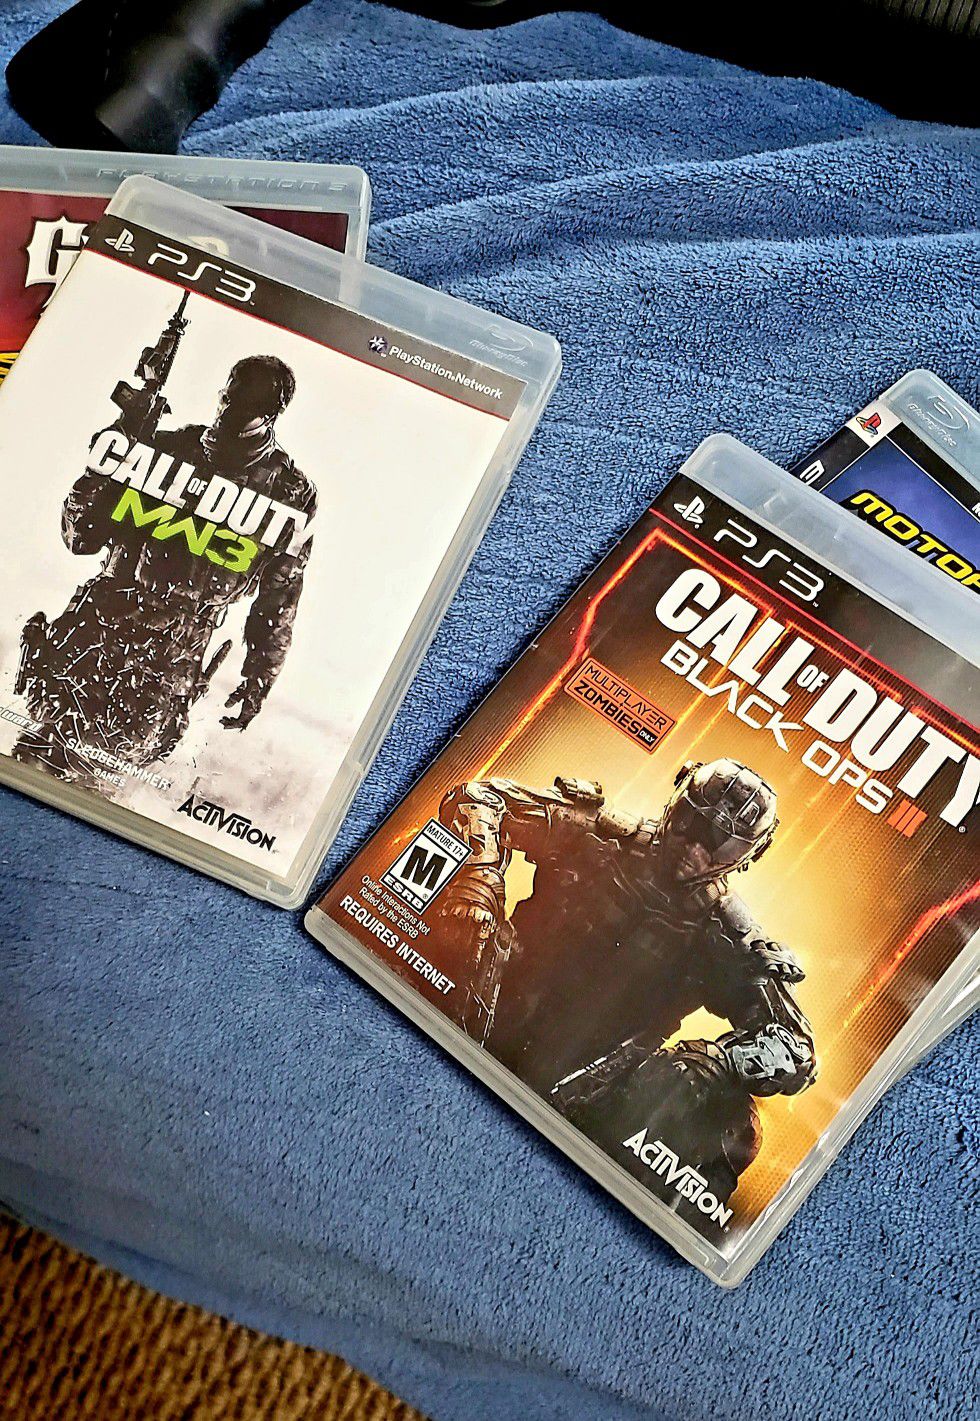 4 PS3 games "Call of Duty" etc..